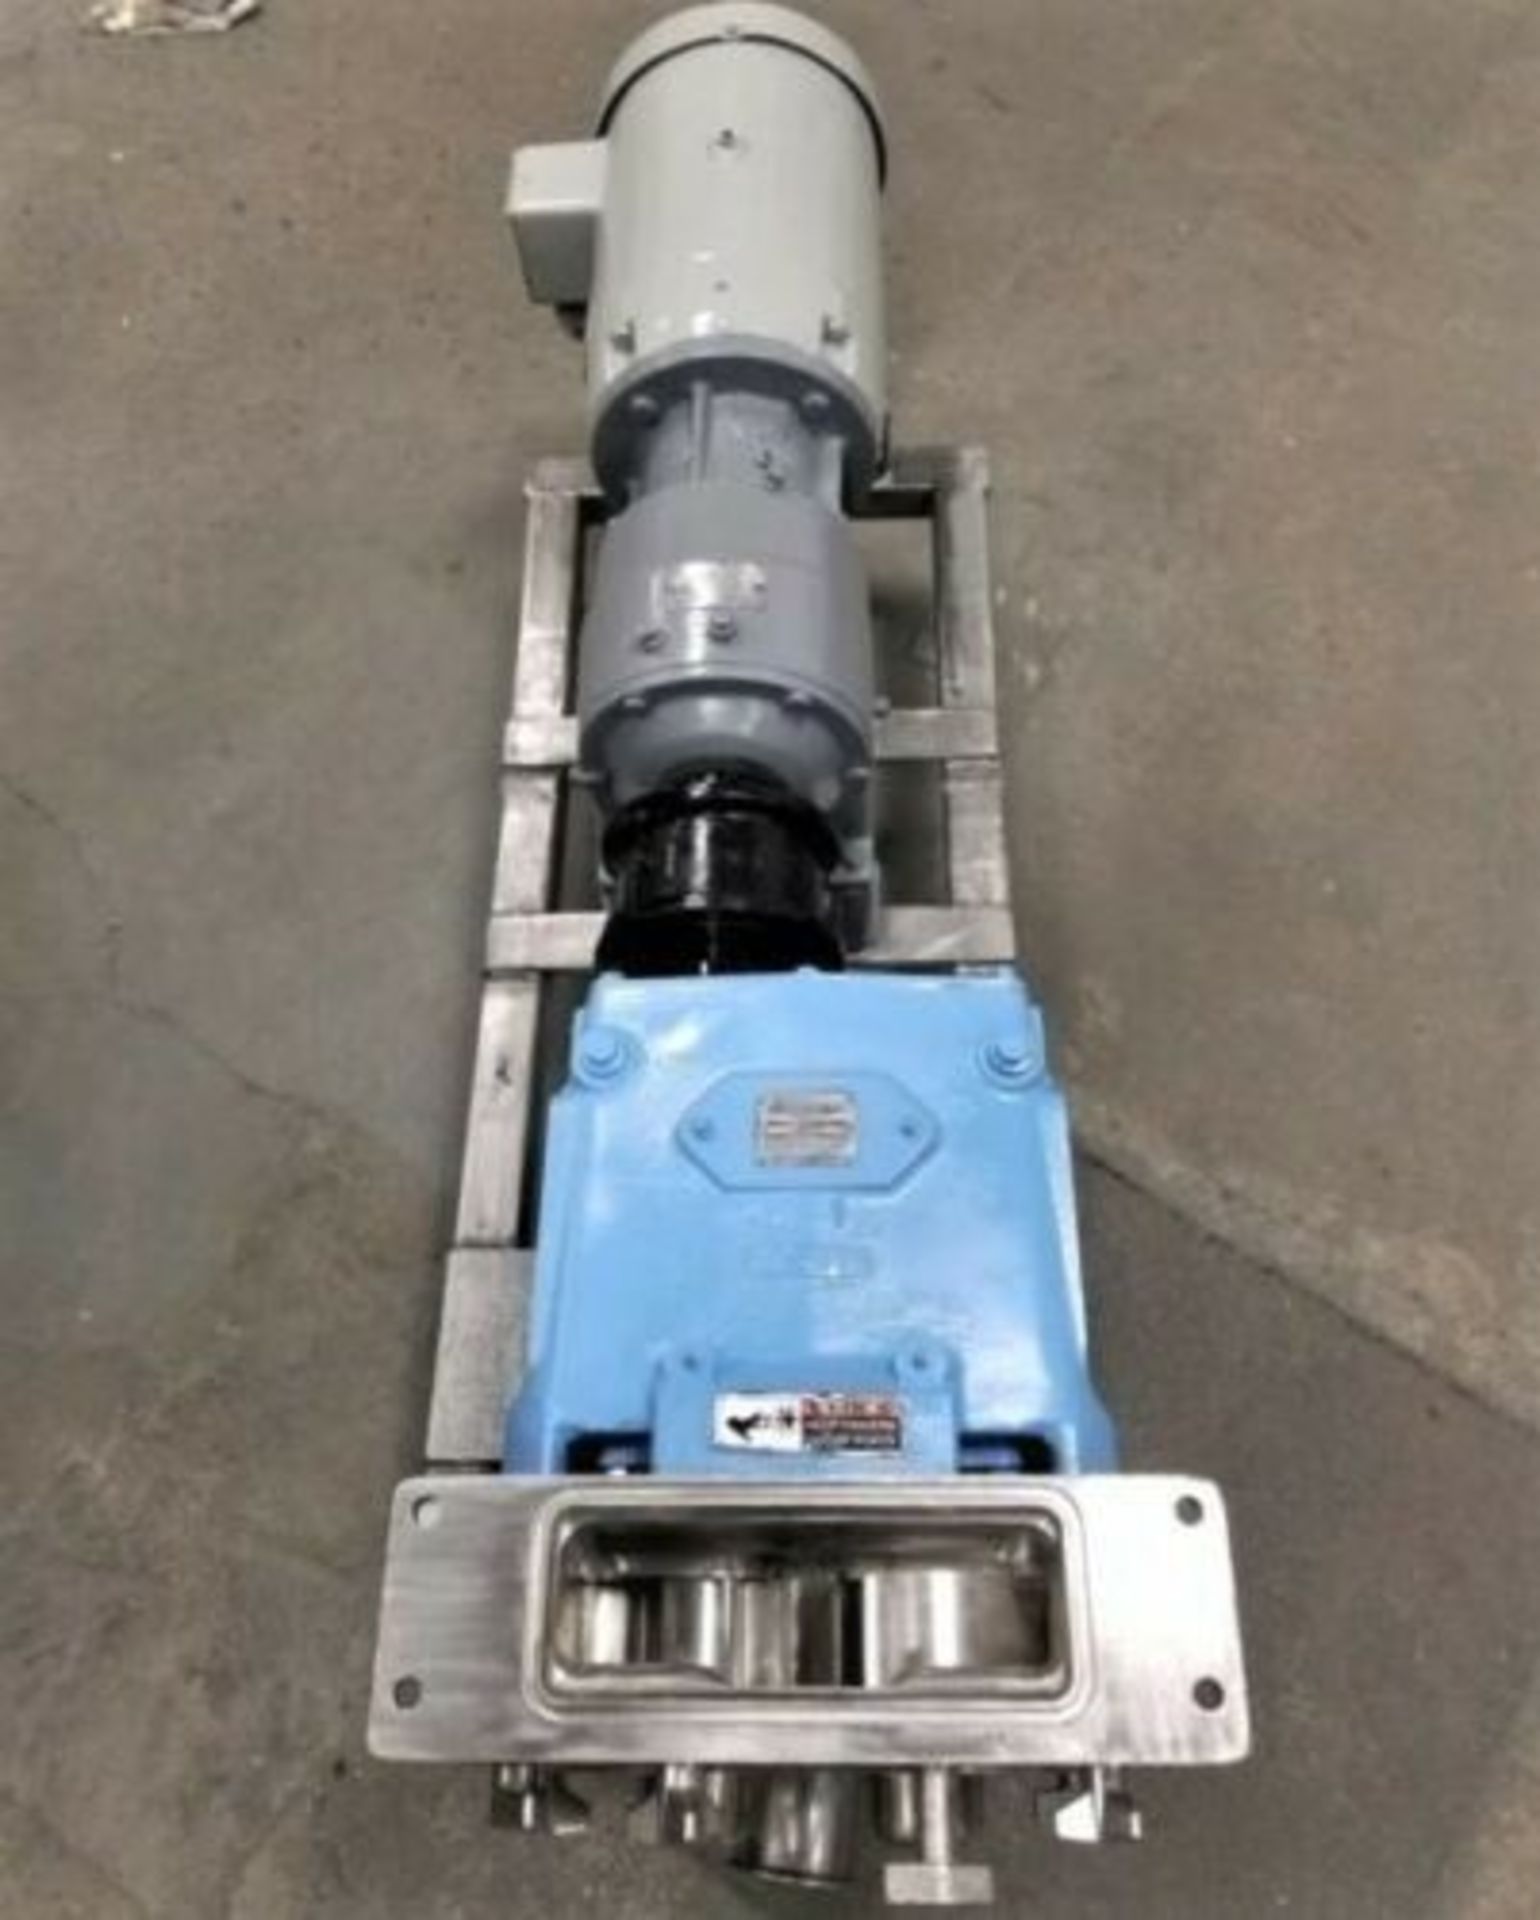 Waukesha SPX Model 134 Stainless Steel Sanitary Positive Displacement Pump, Serial # 300918 02 - Image 7 of 9